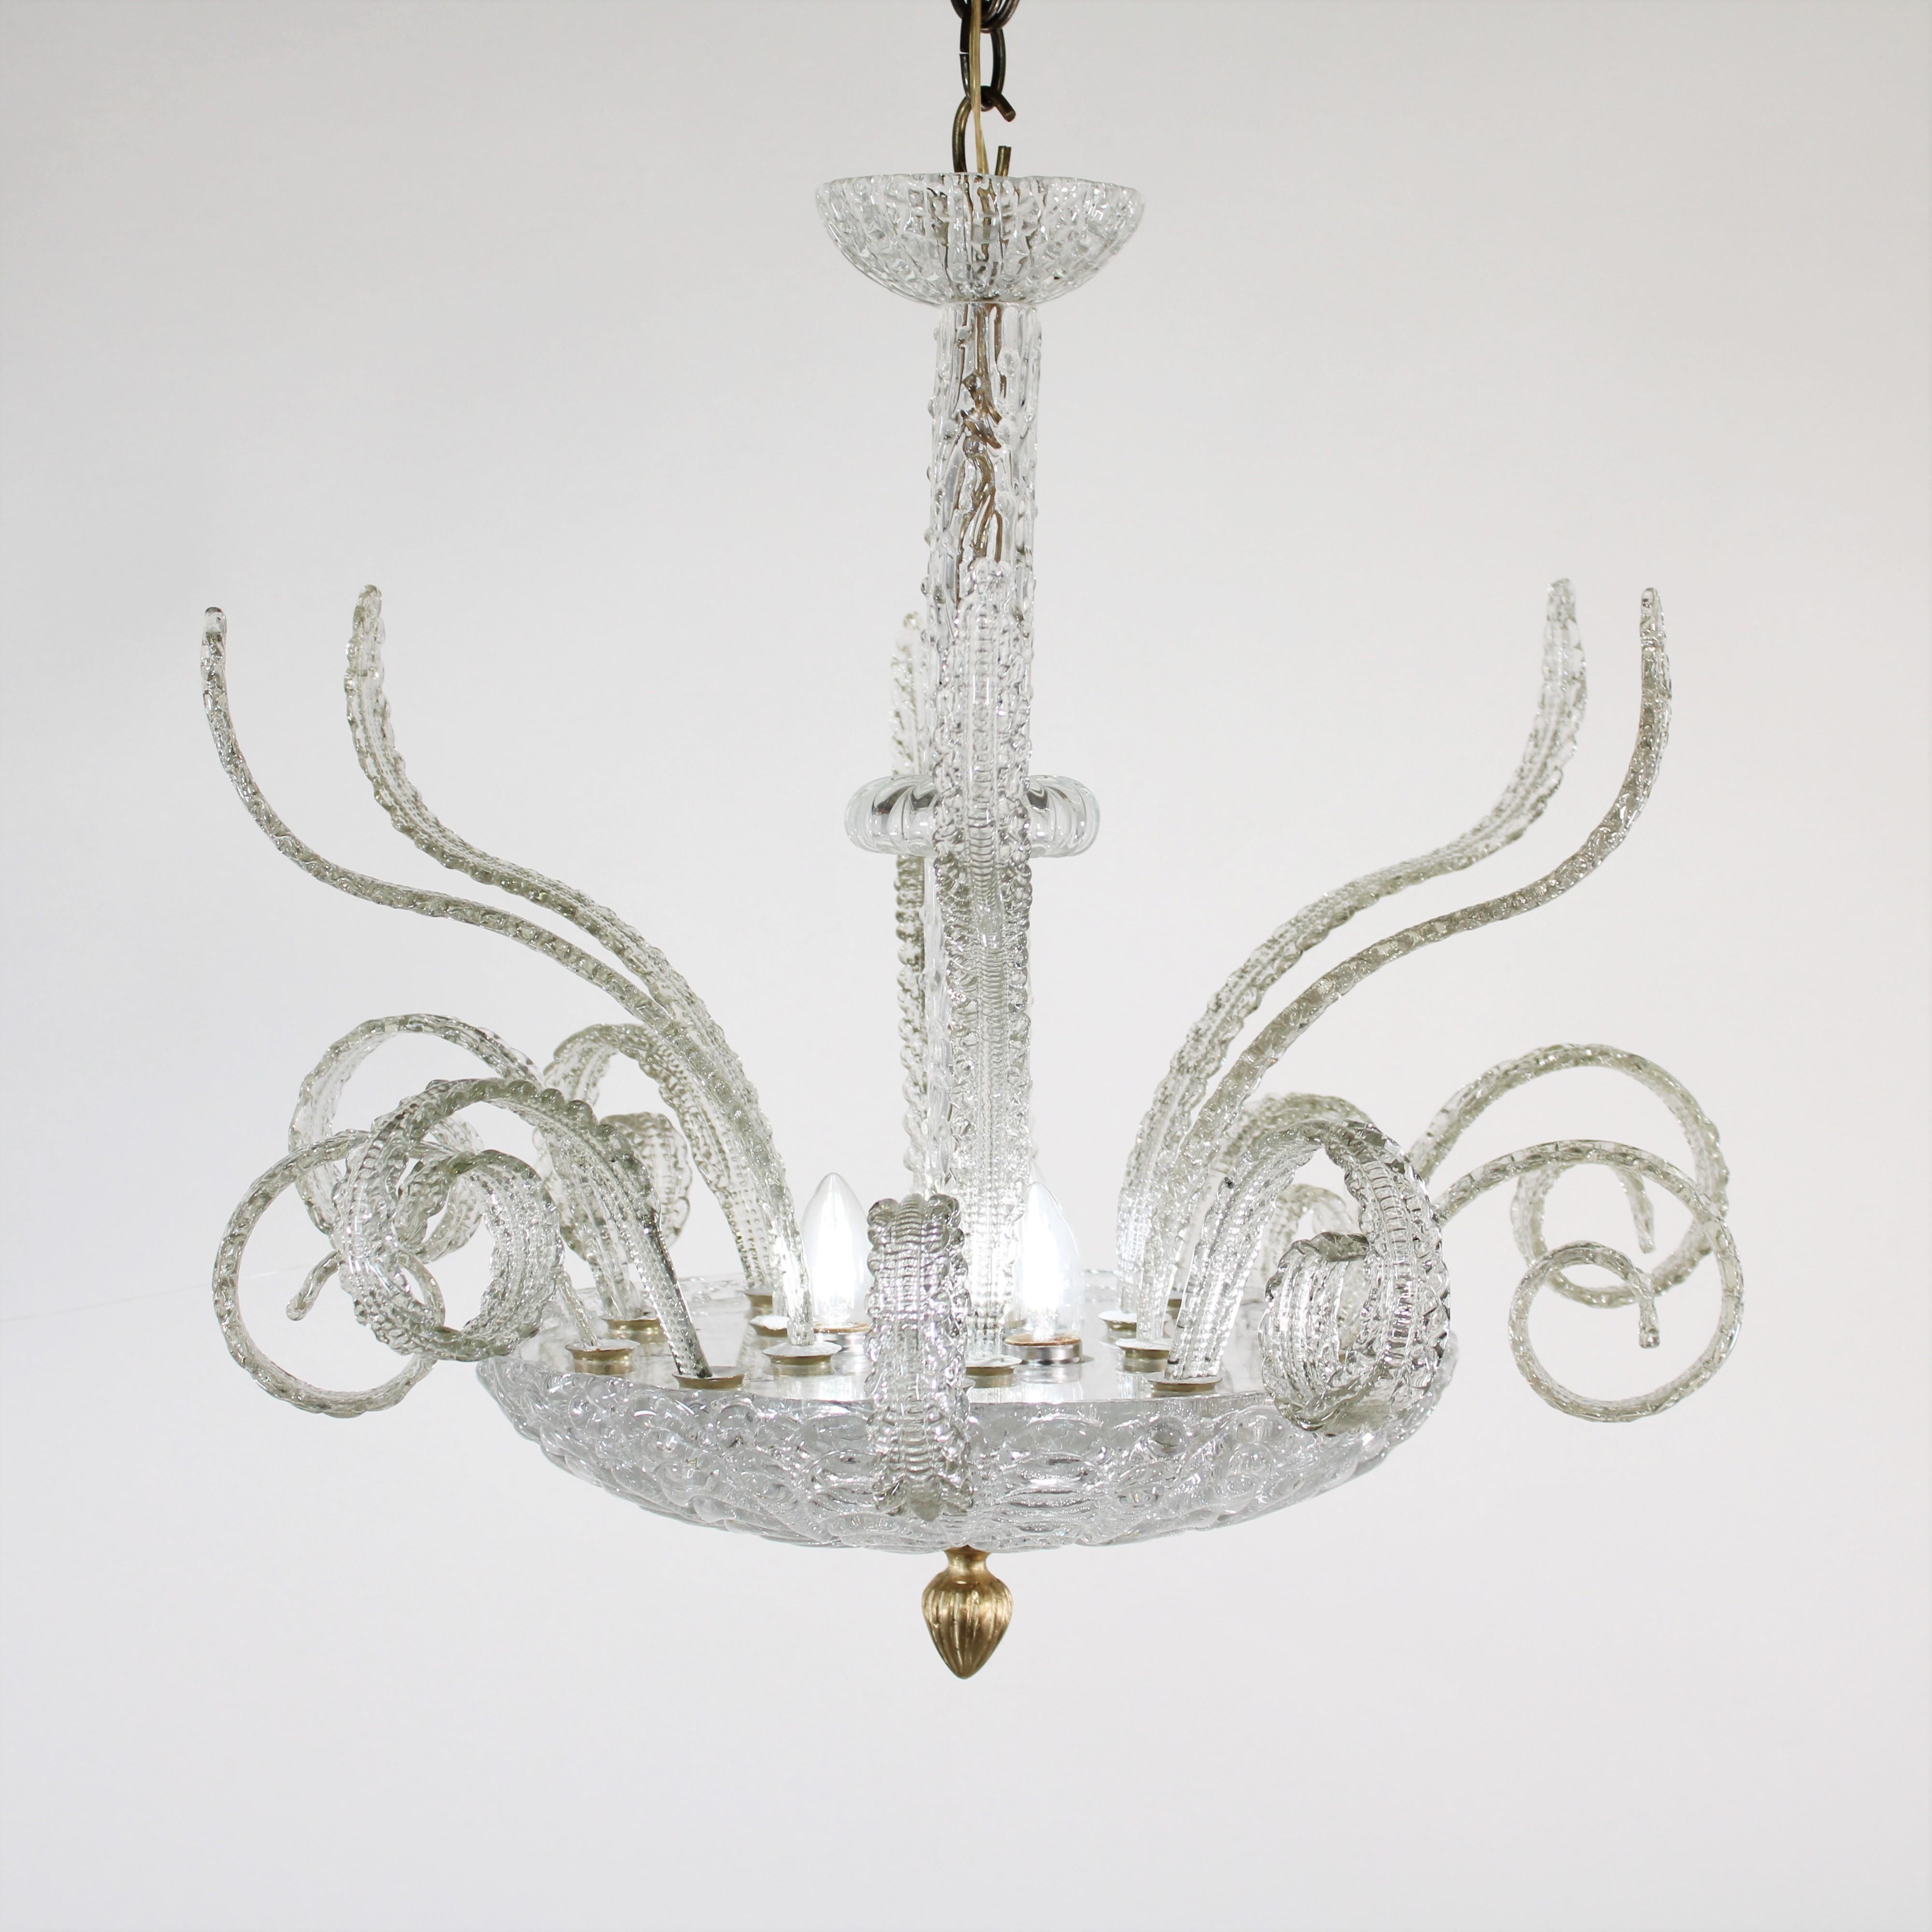 Prized for their elegance, along with the intricacy of techniques and history, Murano glass chandeliers continue to add brilliance to modern and traditional homes. This Midcentury Modern clear glass chandelier that resembles a lotus flower is no